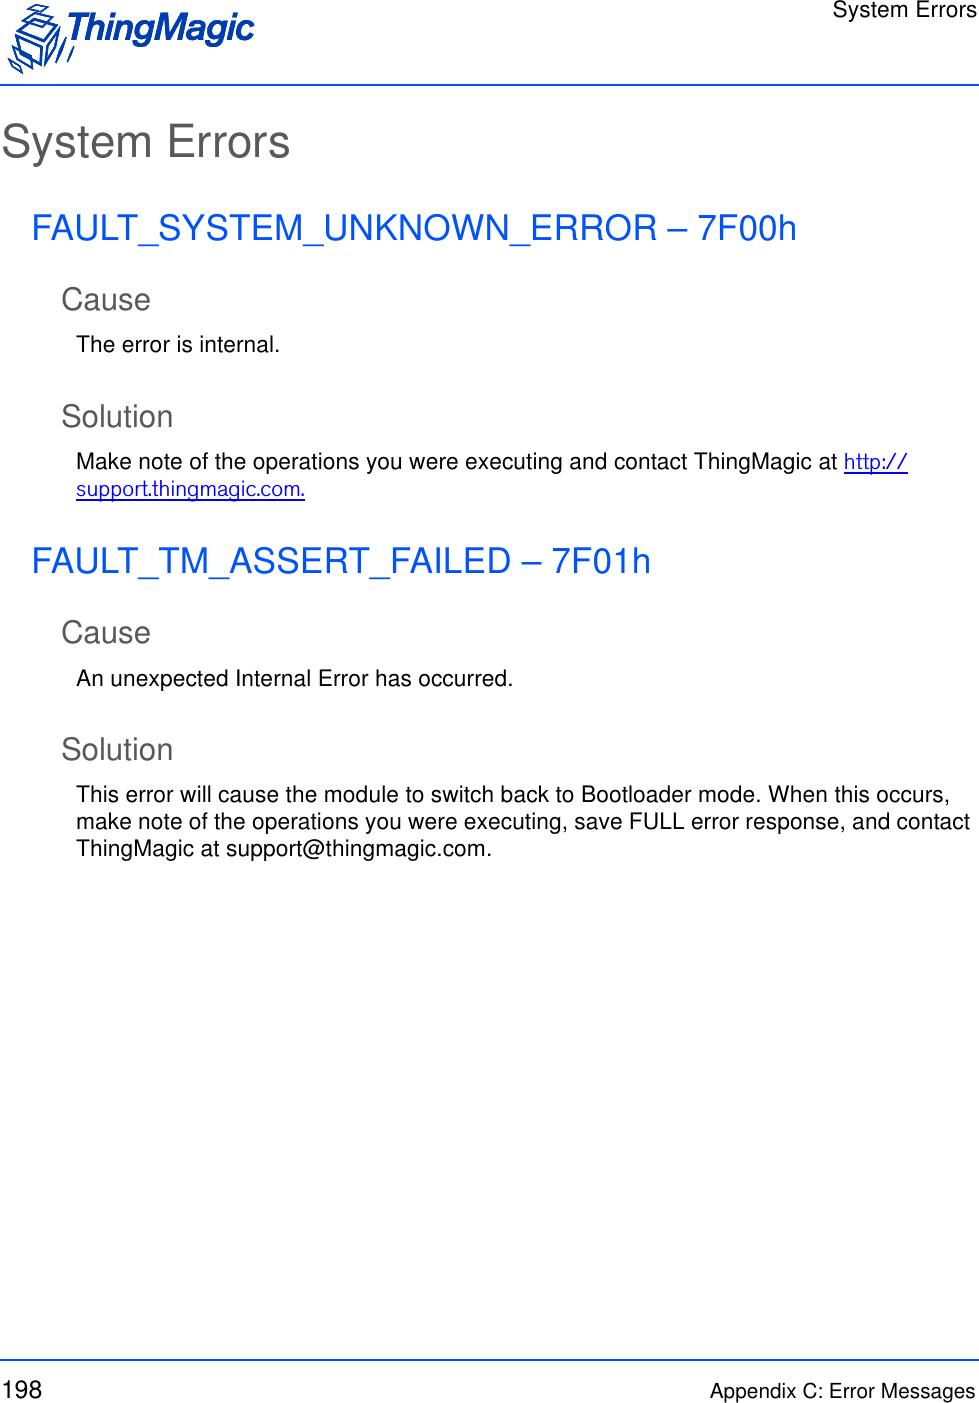 System Errors198 Appendix C: Error MessagesSystem ErrorsFAULT_SYSTEM_UNKNOWN_ERROR – 7F00hCauseThe error is internal.SolutionMake note of the operations you were executing and contact ThingMagic at http://support.thingmagic.com.FAULT_TM_ASSERT_FAILED – 7F01hCauseAn unexpected Internal Error has occurred.SolutionThis error will cause the module to switch back to Bootloader mode. When this occurs, make note of the operations you were executing, save FULL error response, and contact ThingMagic at support@thingmagic.com.